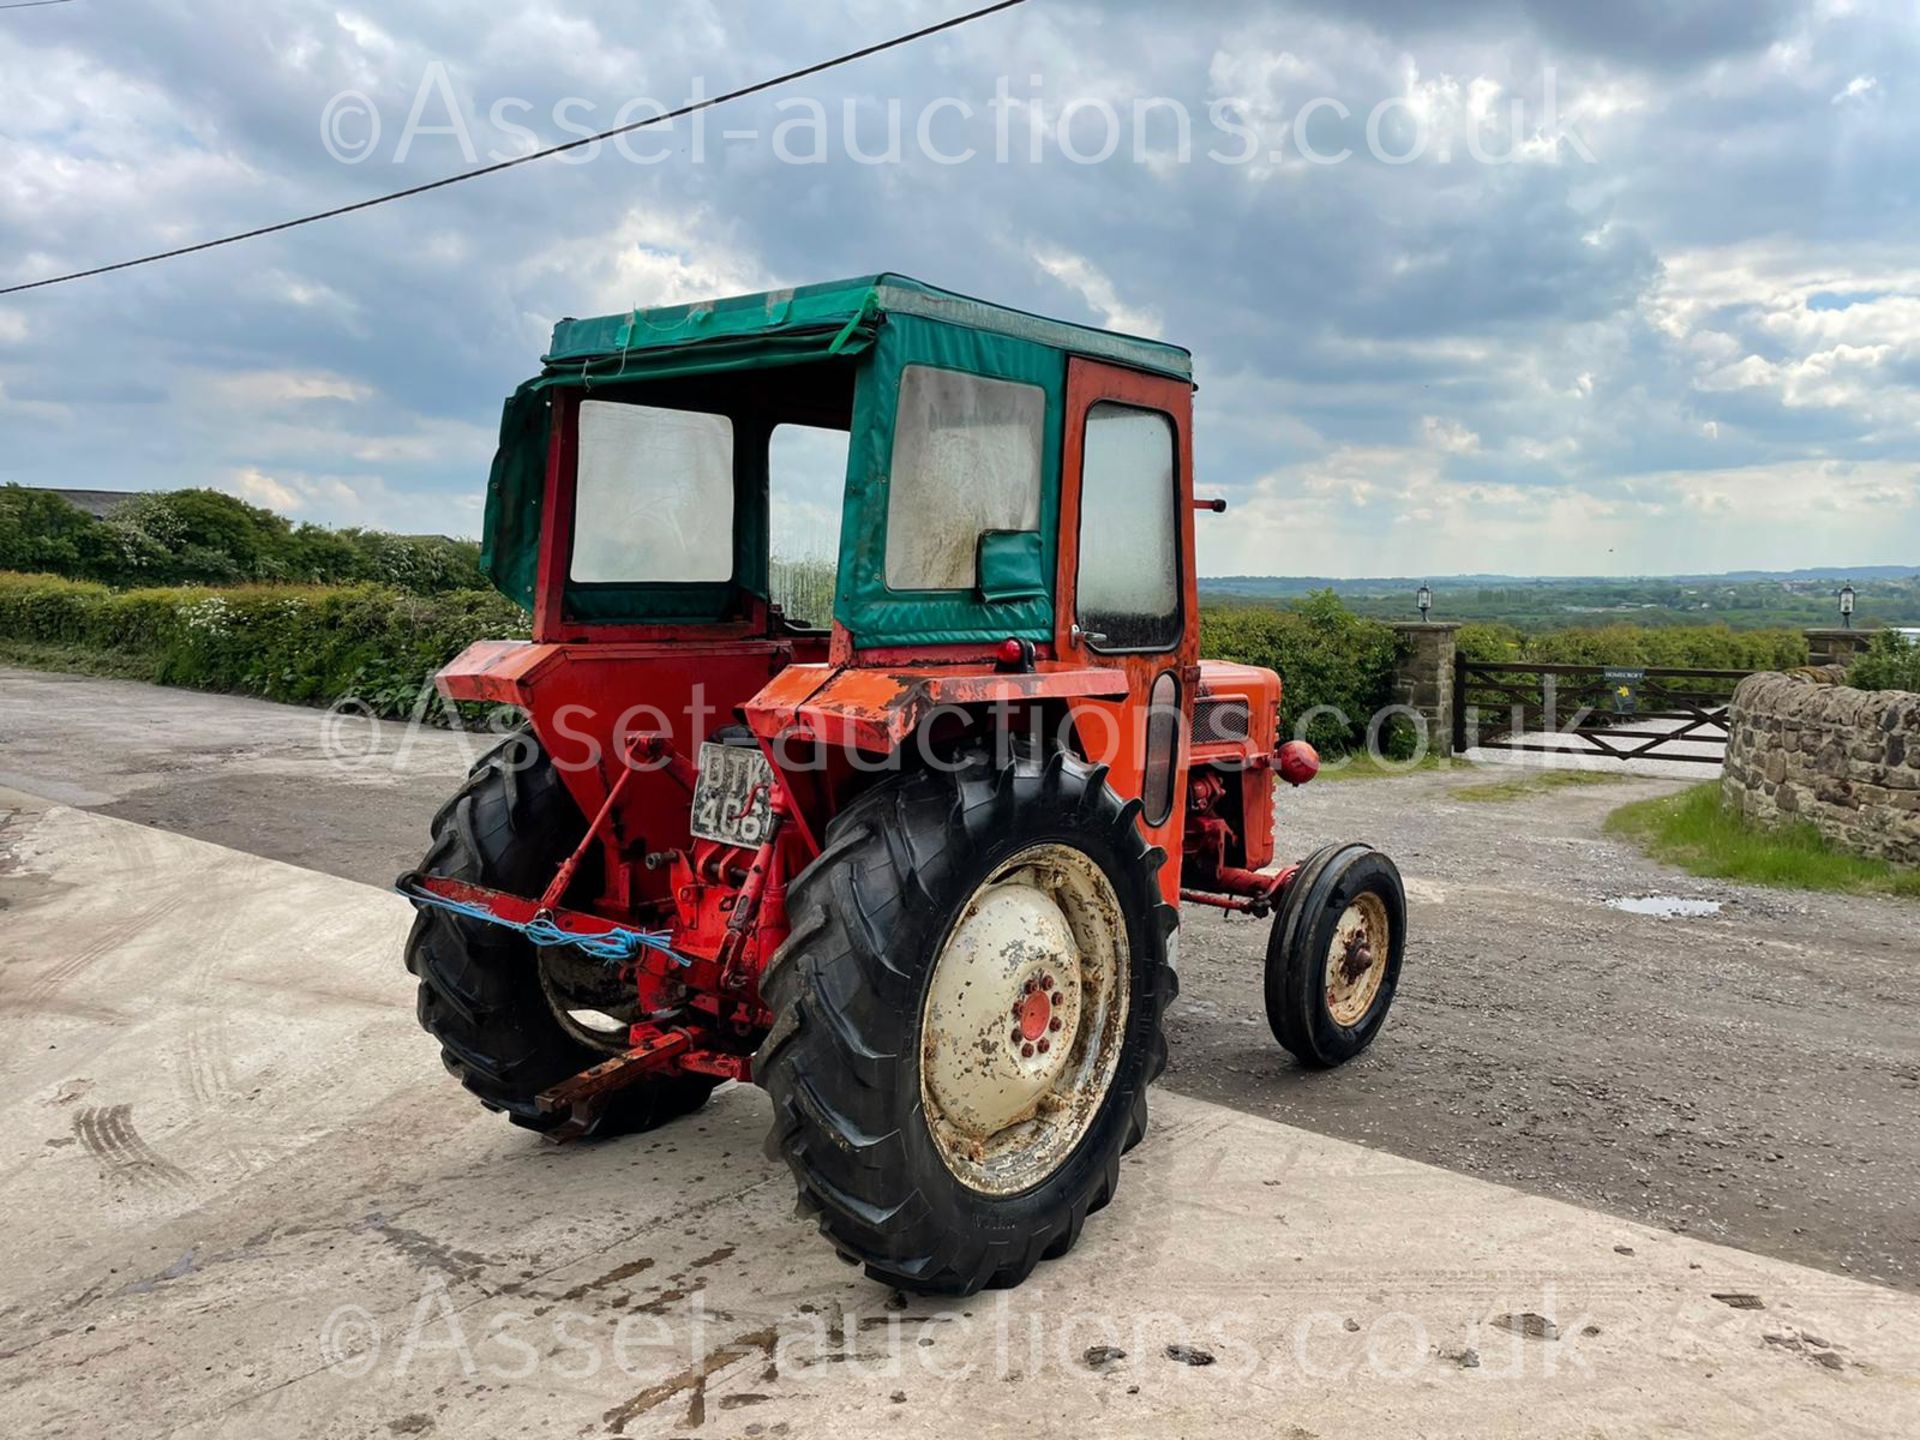 McCORMICK B-274 DIESEL TRACTOR, RUNS DRIVES AND WORKS, GOOD SET OF TYRES, CABBED *PLUS VAT* - Image 7 of 16